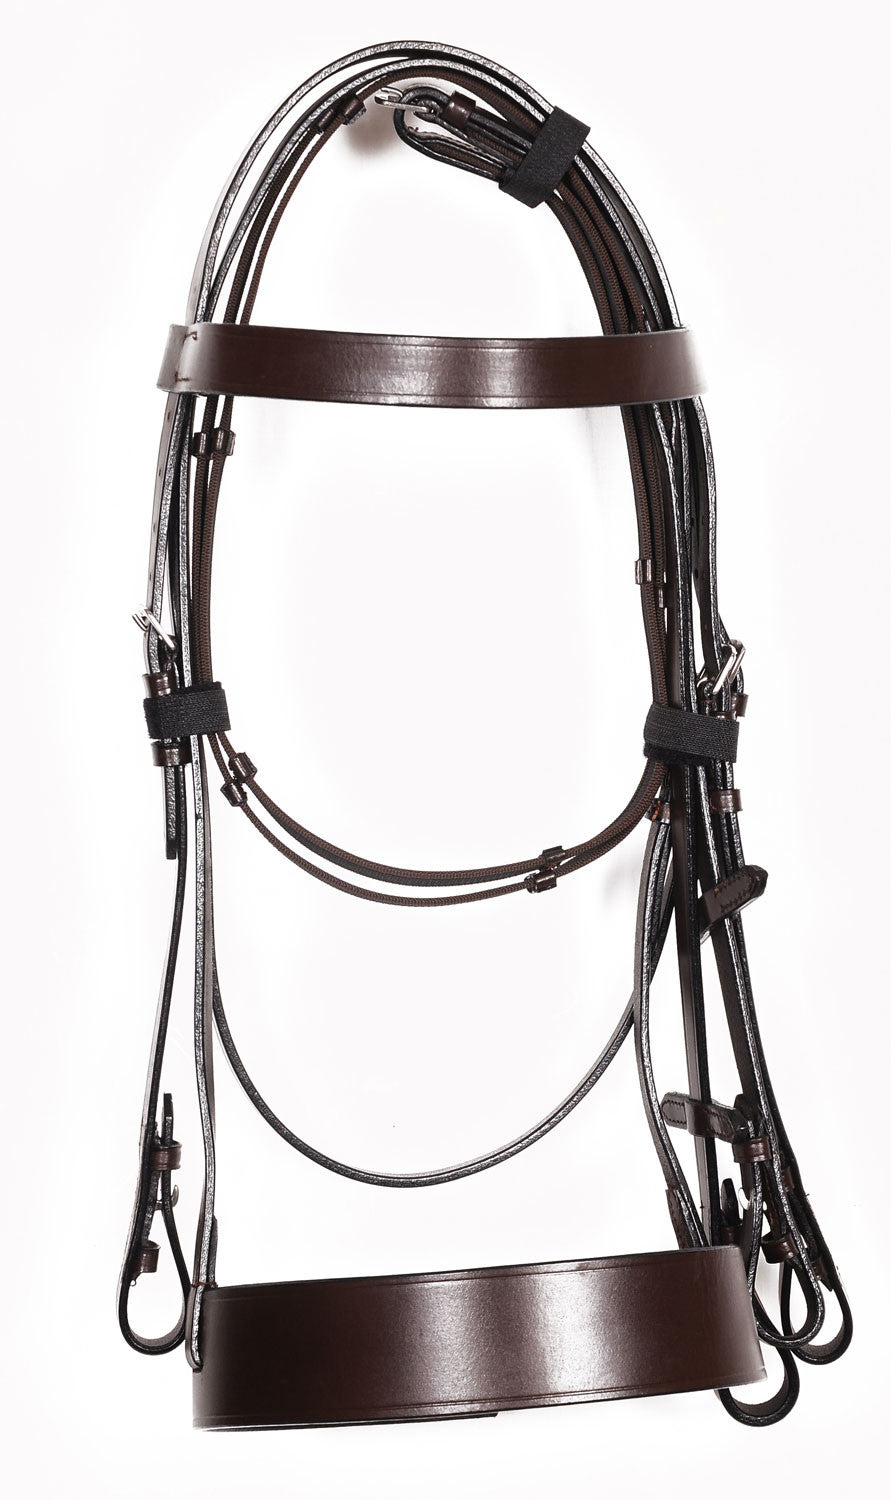 LEATHER-HUNTER-BRIDLE-BROWN-FRONT.jpg